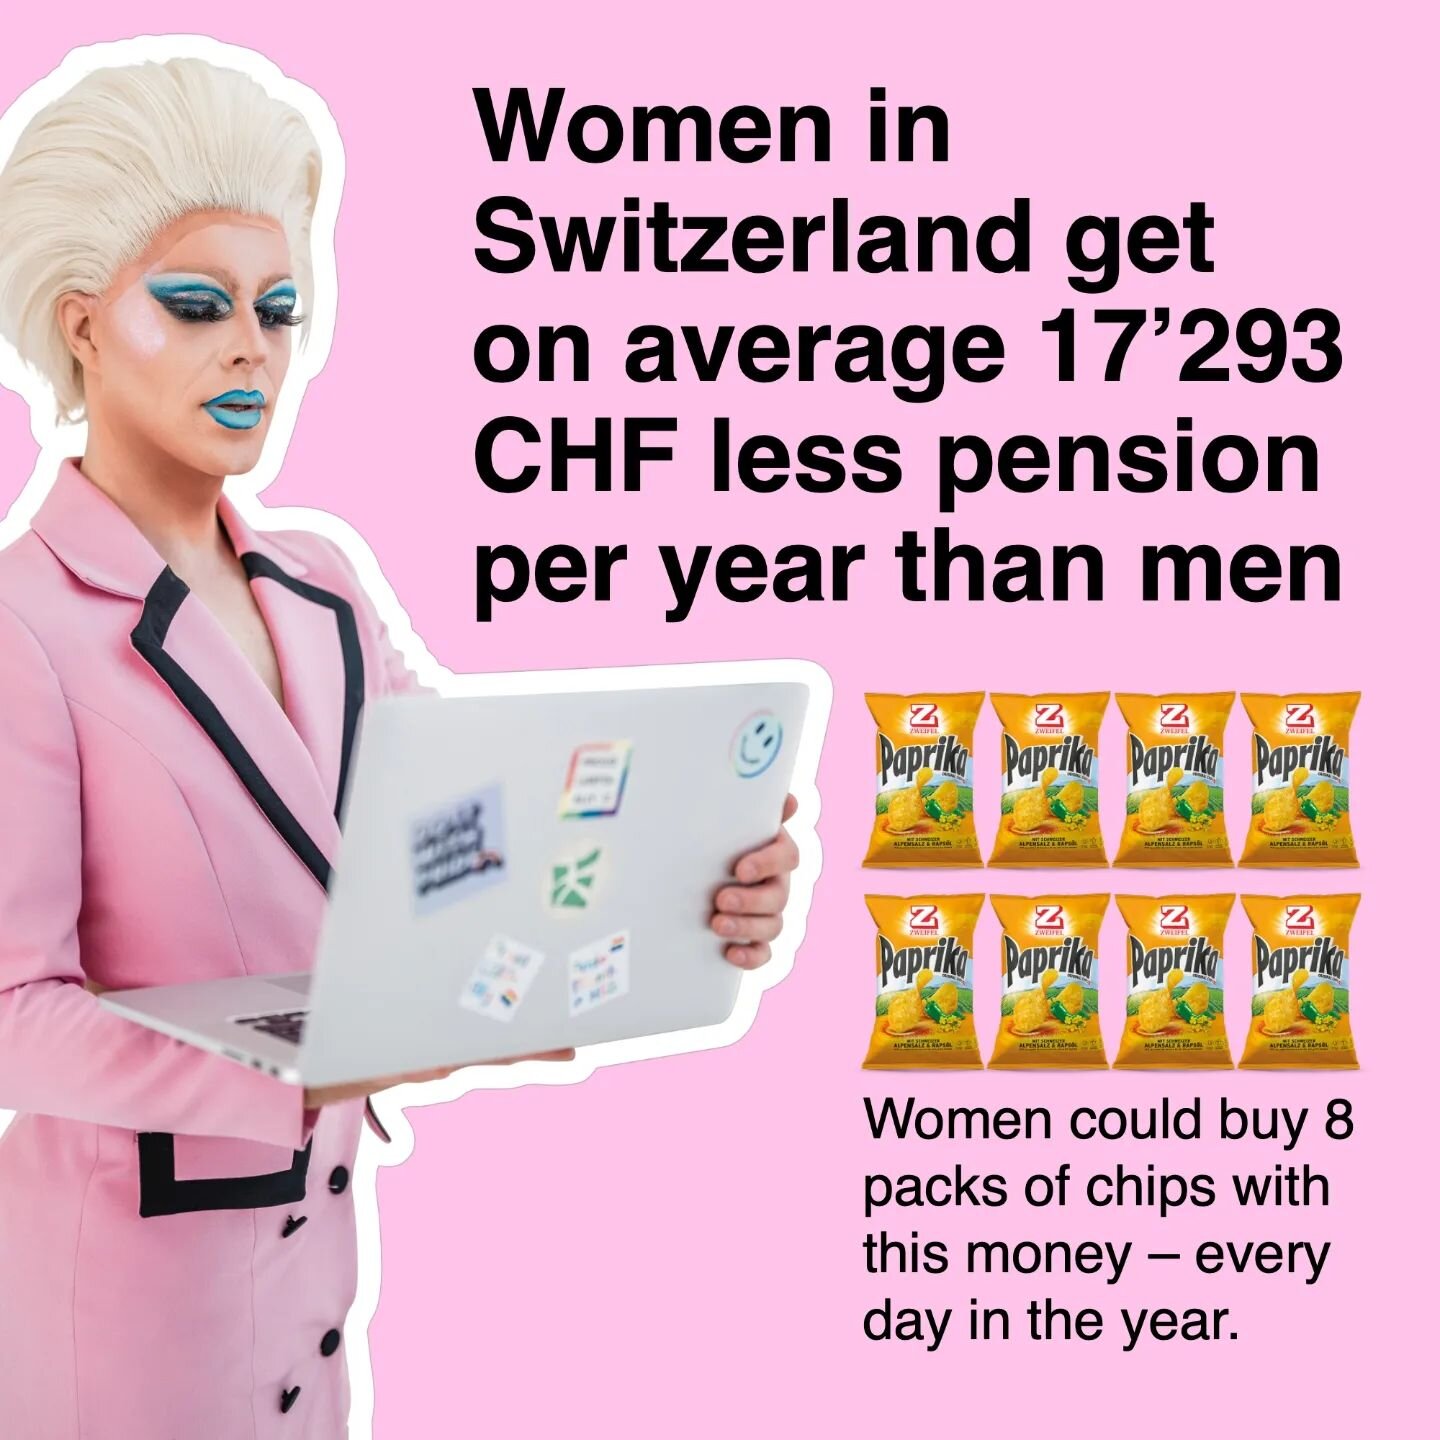 I earlier said that women get on average 1/3 less pension than men. 1/3 is a bit abstract. If we look at the absolute number, it becomes shocking: the Gender Pension Gap is 17&rsquo;293 CHF (BFS, 2021). That is a lot of money! Look at the slides in t